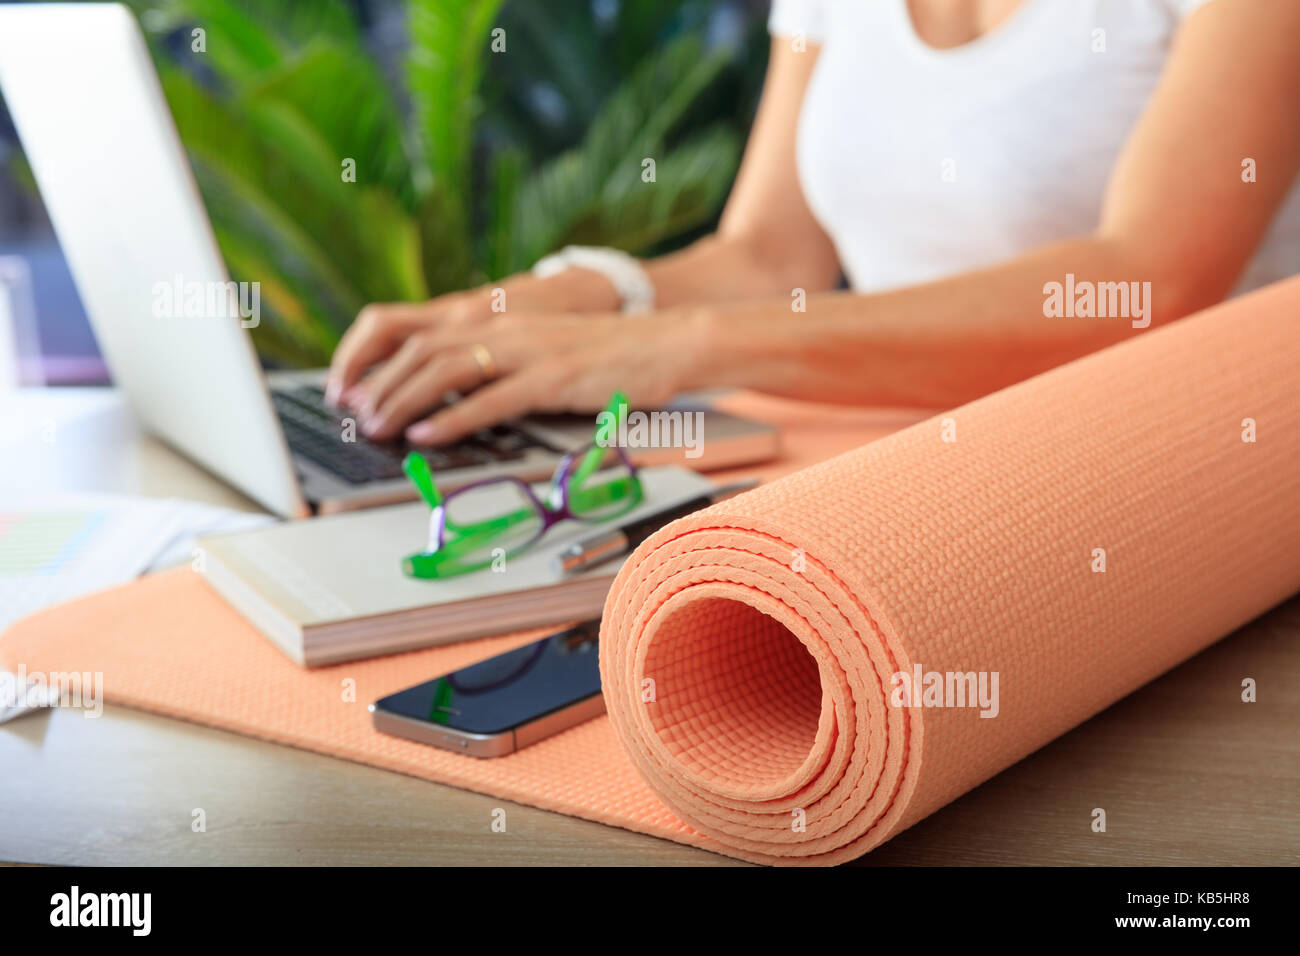 Relax at work concept. Yoga mat in an office desk Stock Photo